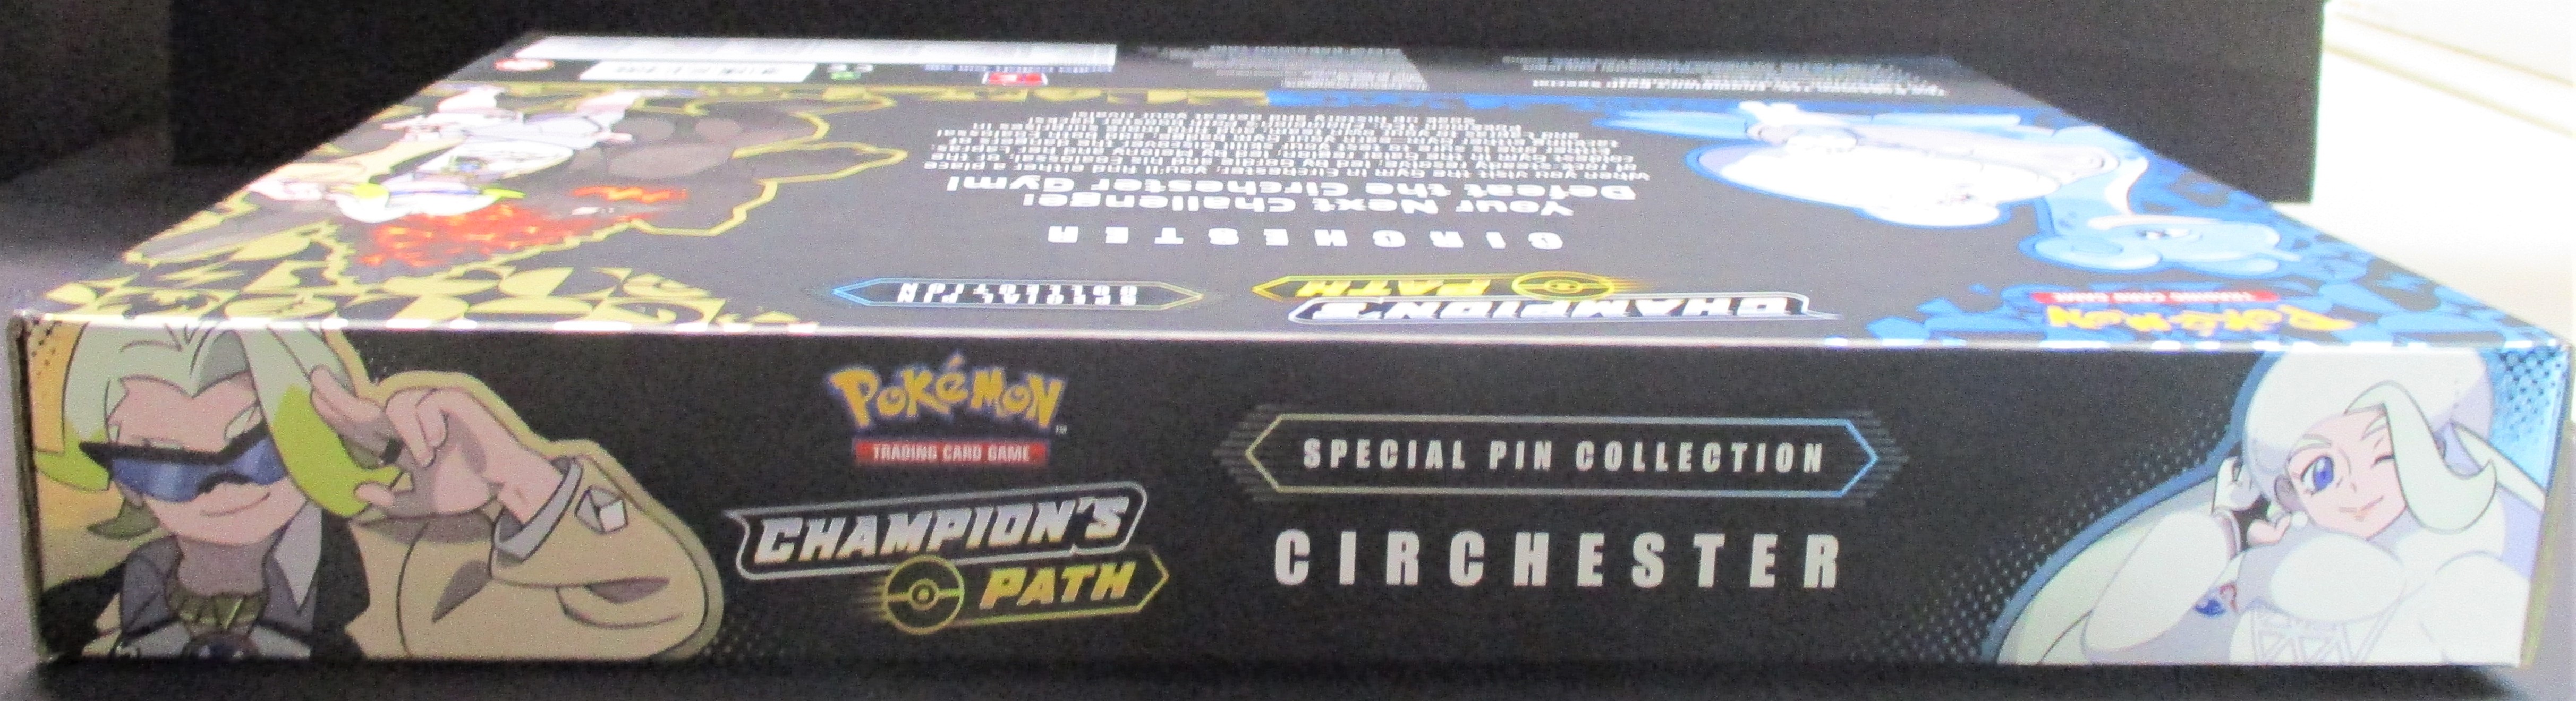 Pokemon TCG Champions Path Special Pin Collection box Circhester NEW AND SEALED 